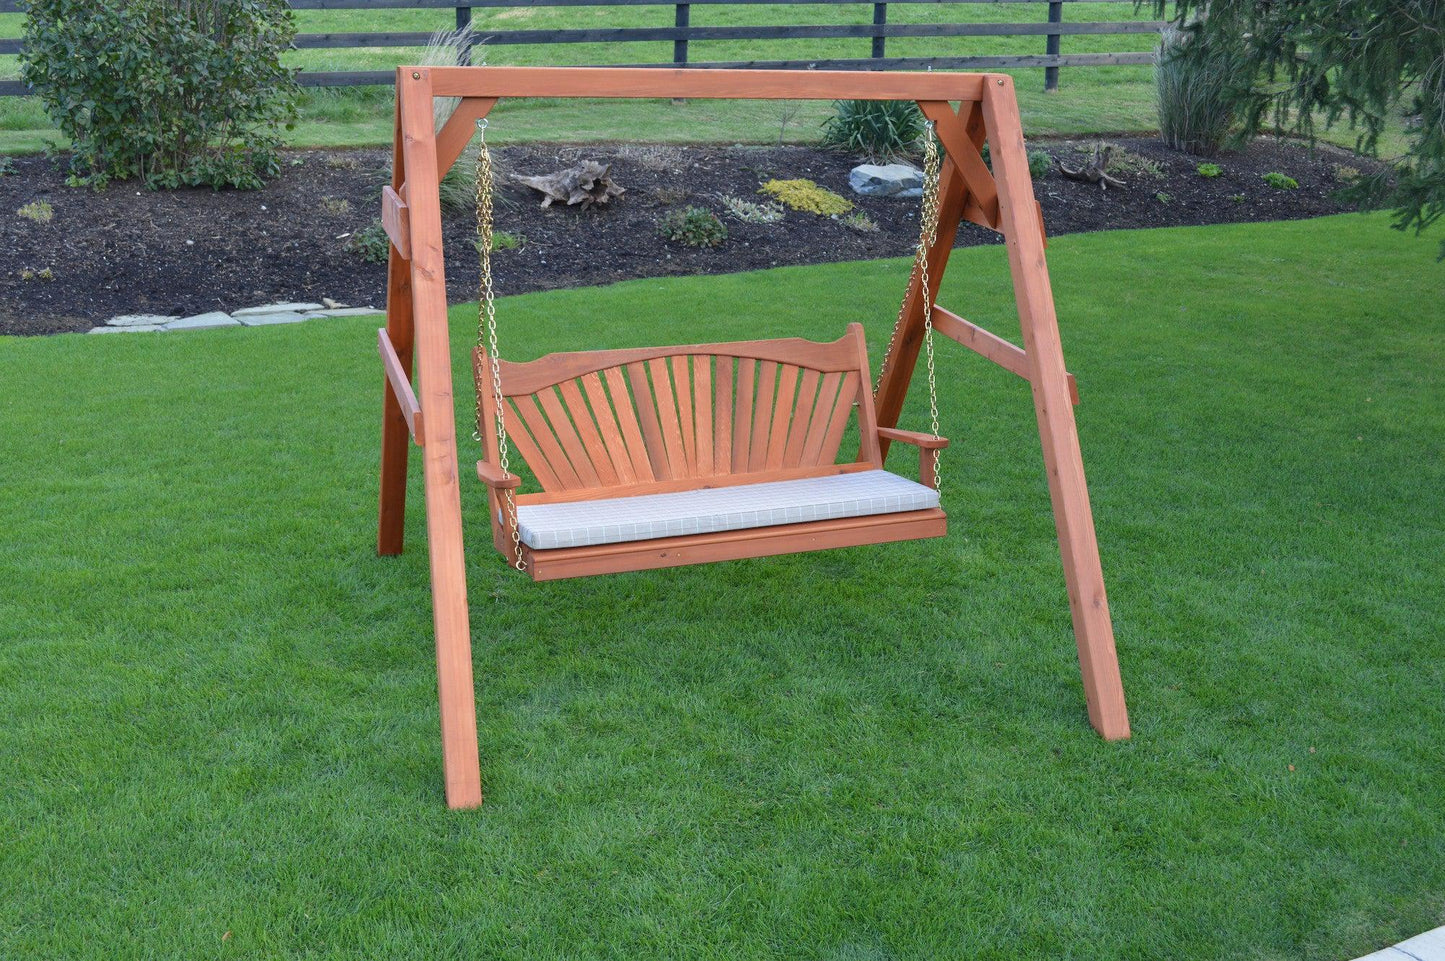 Regallion Outdoor 4ft  4x4  A-Frame  Red Cedar Swing Stand for Swing or Swingbed Heavy Duty 900 lbs Max Weight Capacity (Hangers Included) - LEAD TIME TO SHIP 2 WEEKS